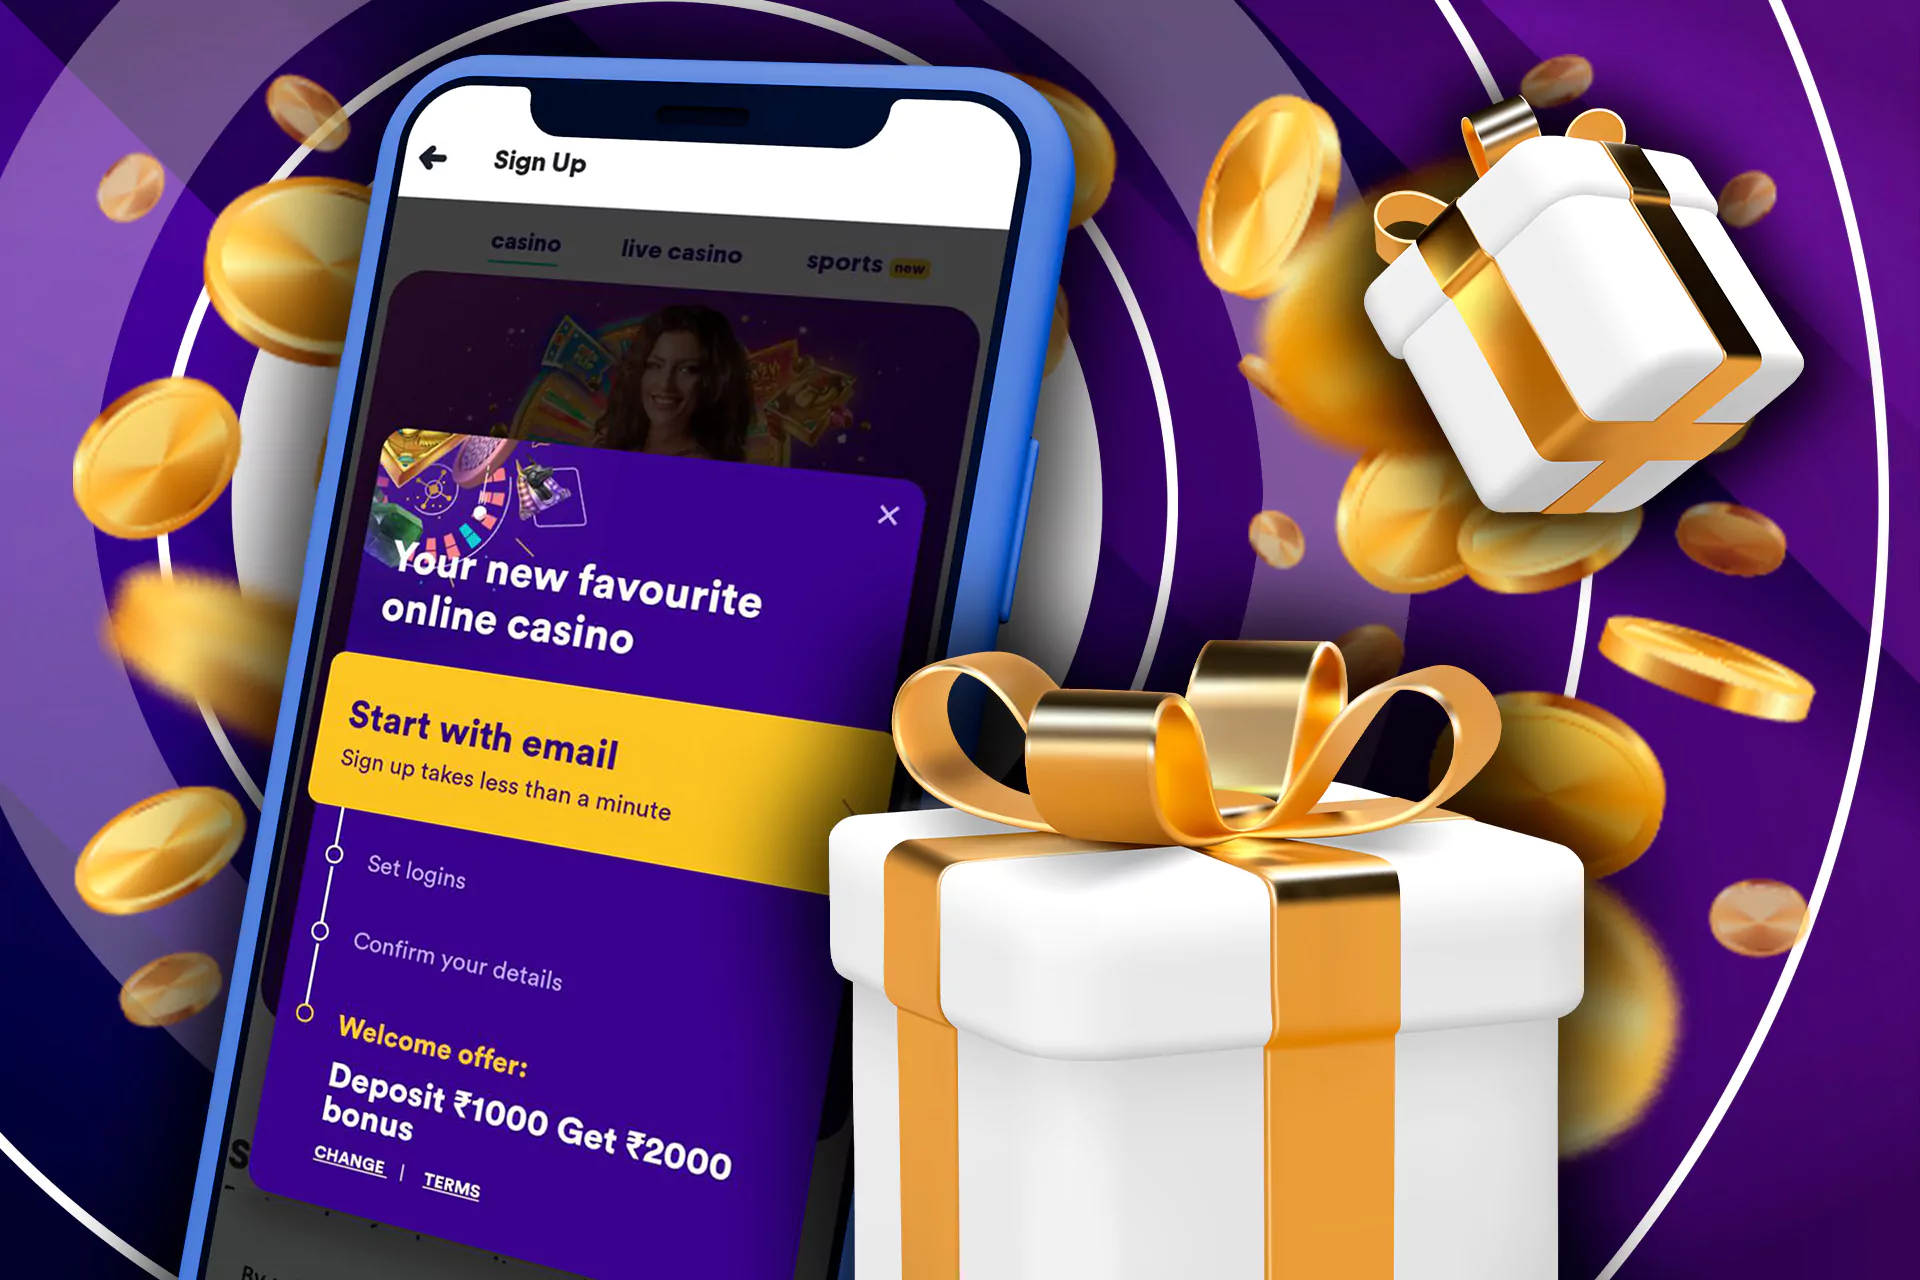 During registration in the Casumo app, you can choose the welcome bonus on sports betting or casino playing.